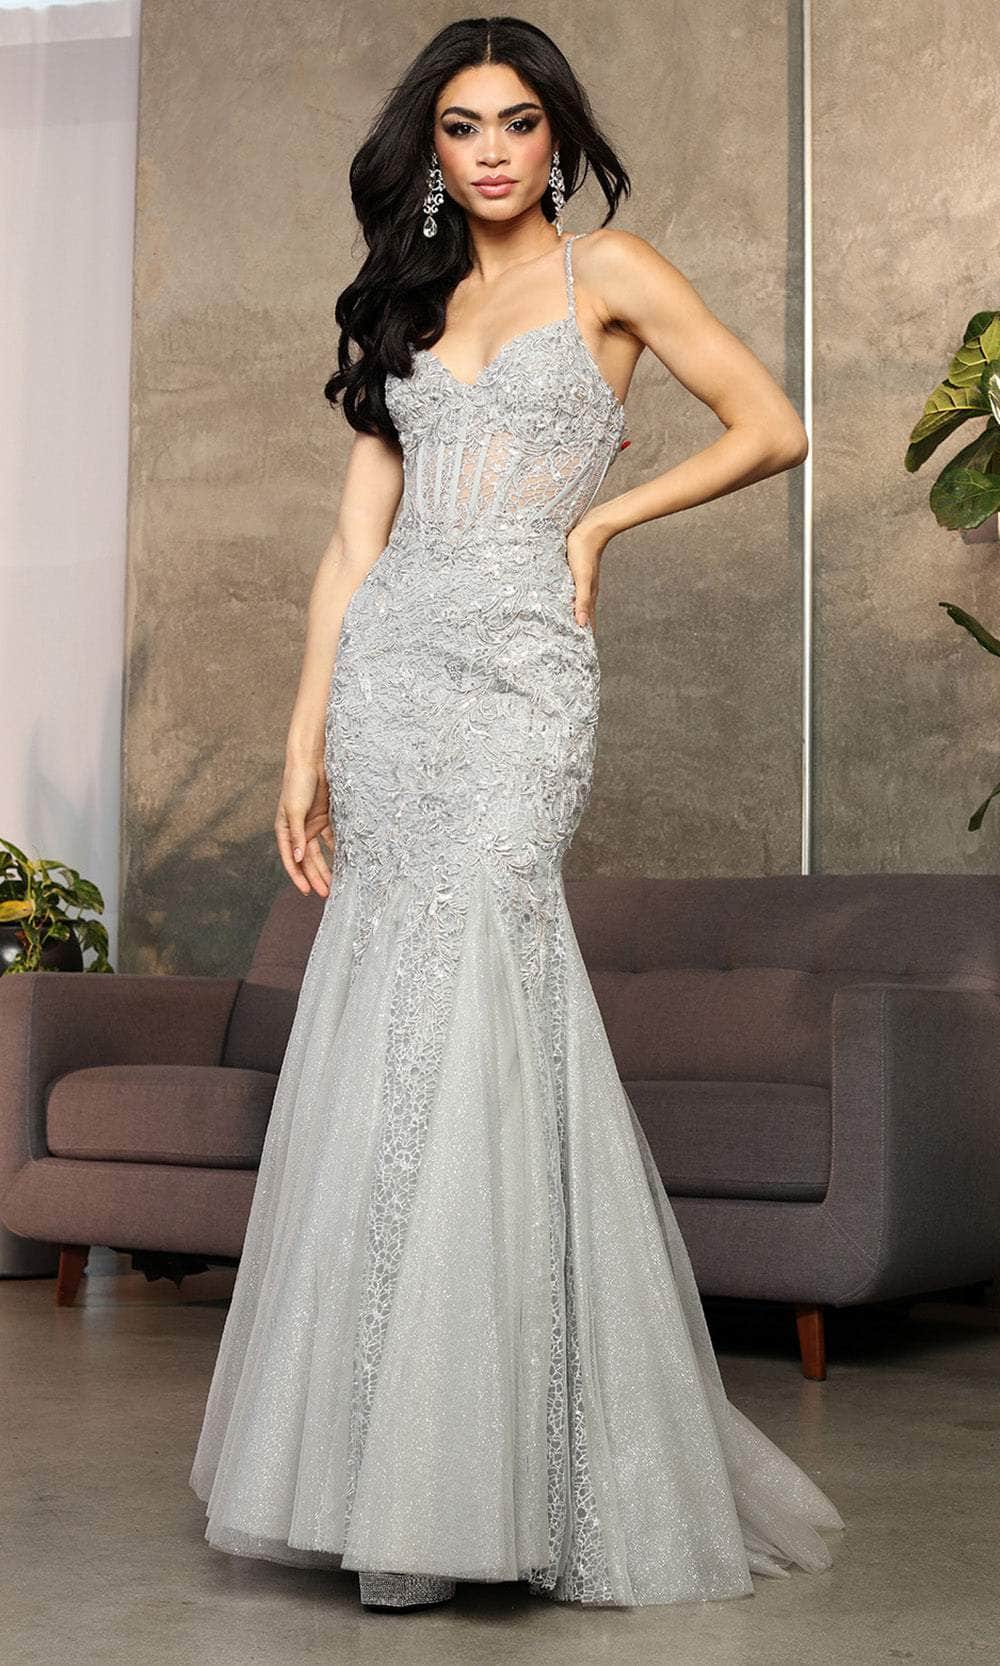 May Queen RQ8059 - Embroidered Godets Prom Gown Prom Dresses 4 / Silver